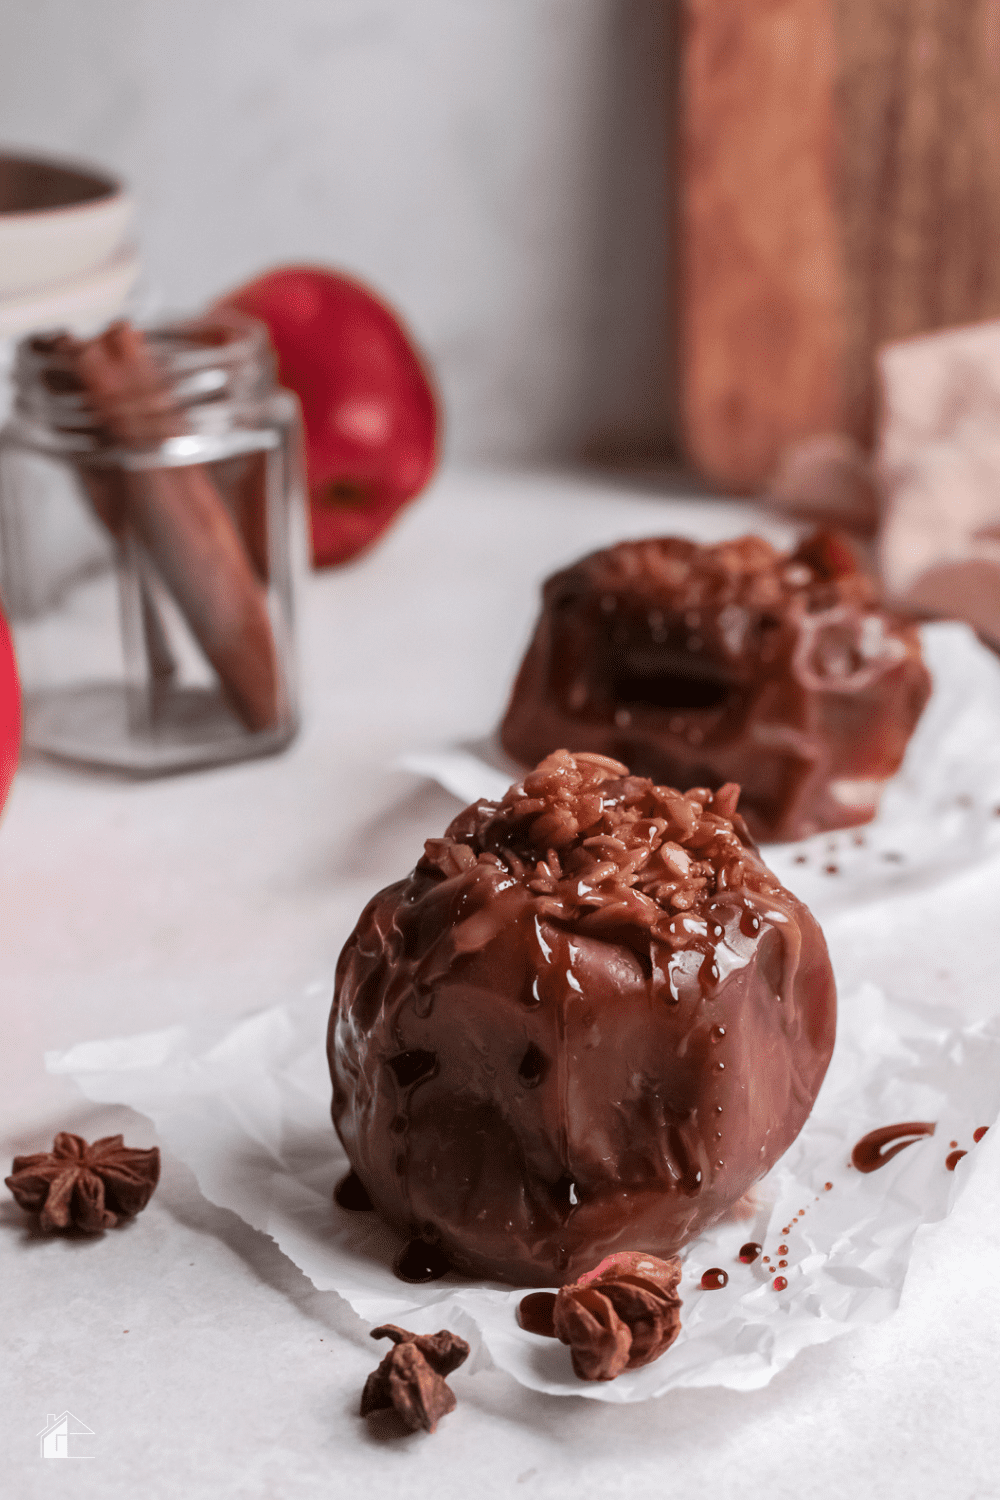 If you're looking for a quick and easy dessert idea, try these stuffed apples! They can be made in just minutes using your instant pot. via @mystayathome